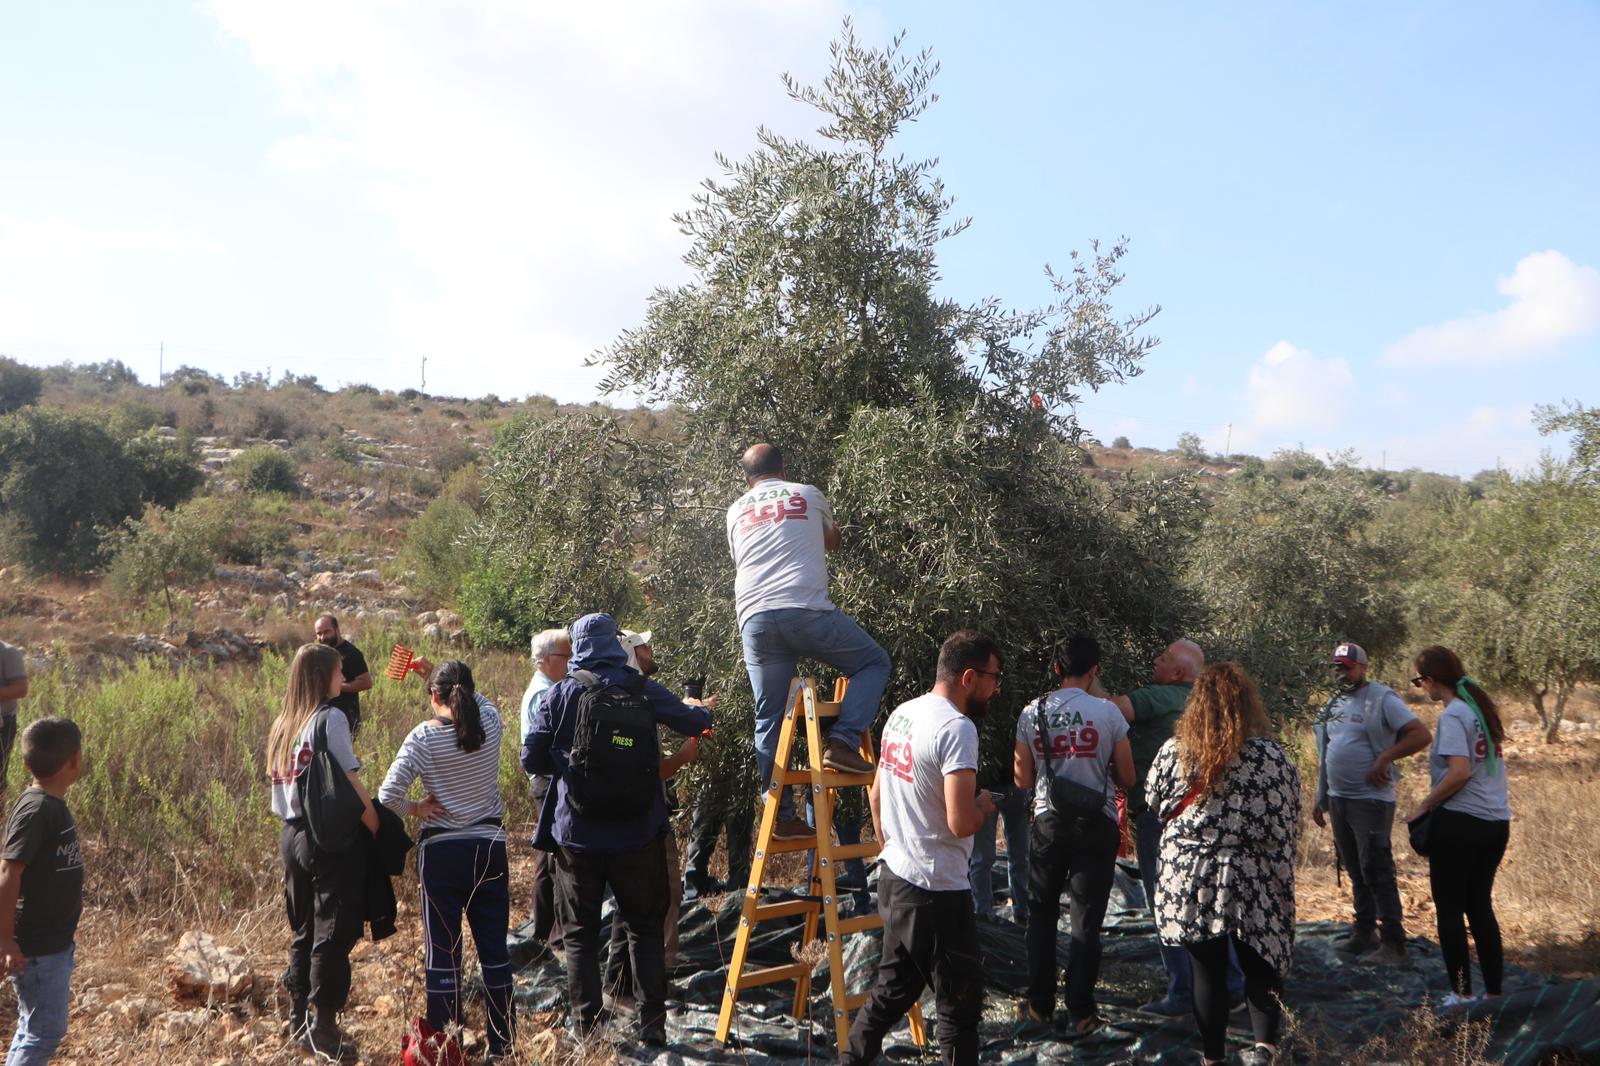 Youth groups help farmers pick olives